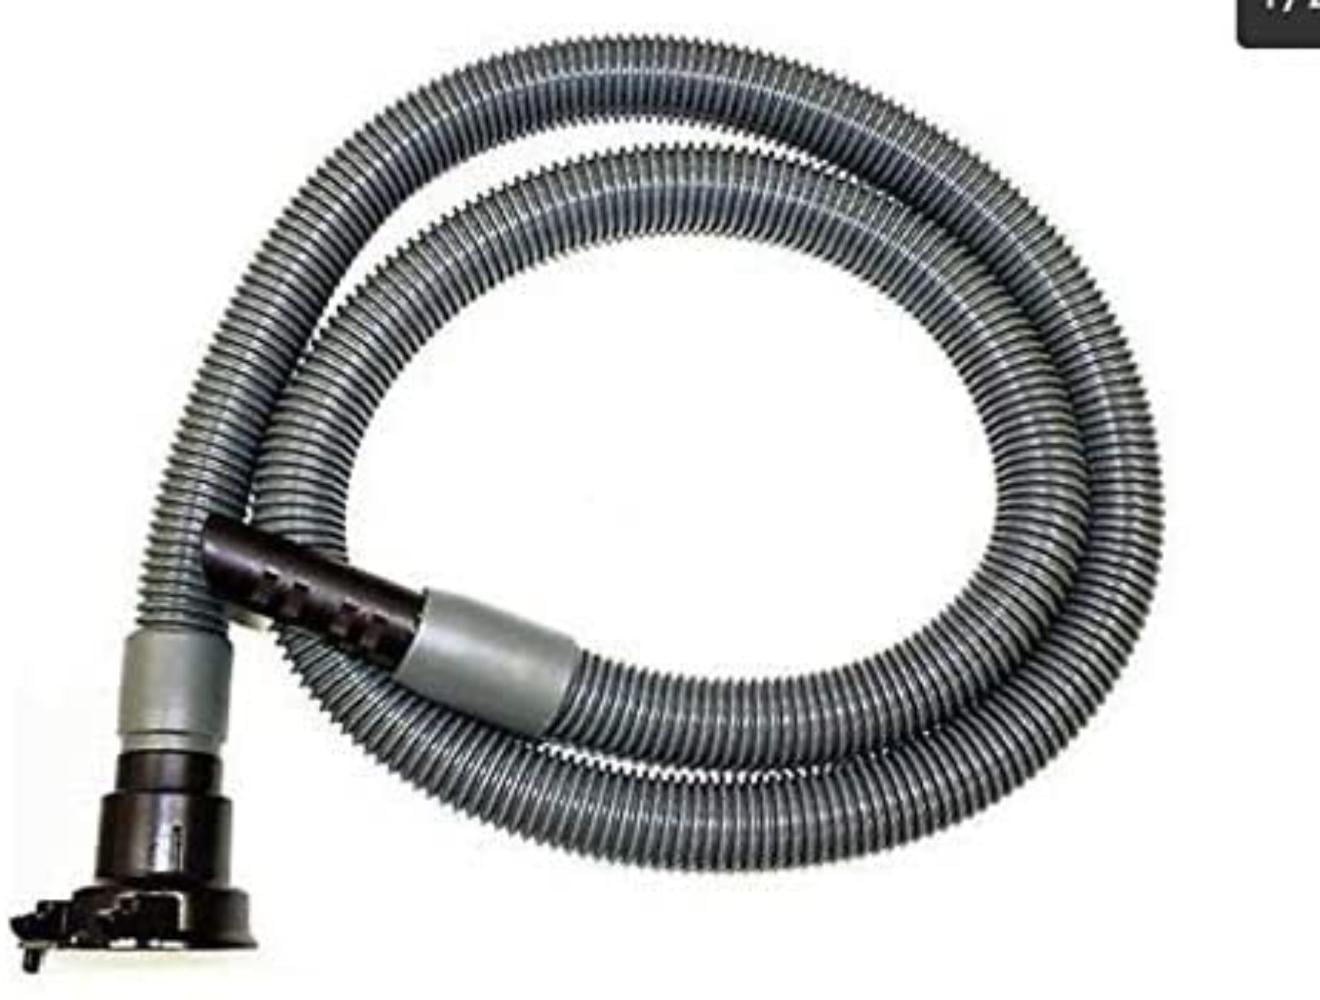 Electrolux TWIN TECH & ERGOEASY Vacuum Cleaner Suction Hose Pipe Genuine 